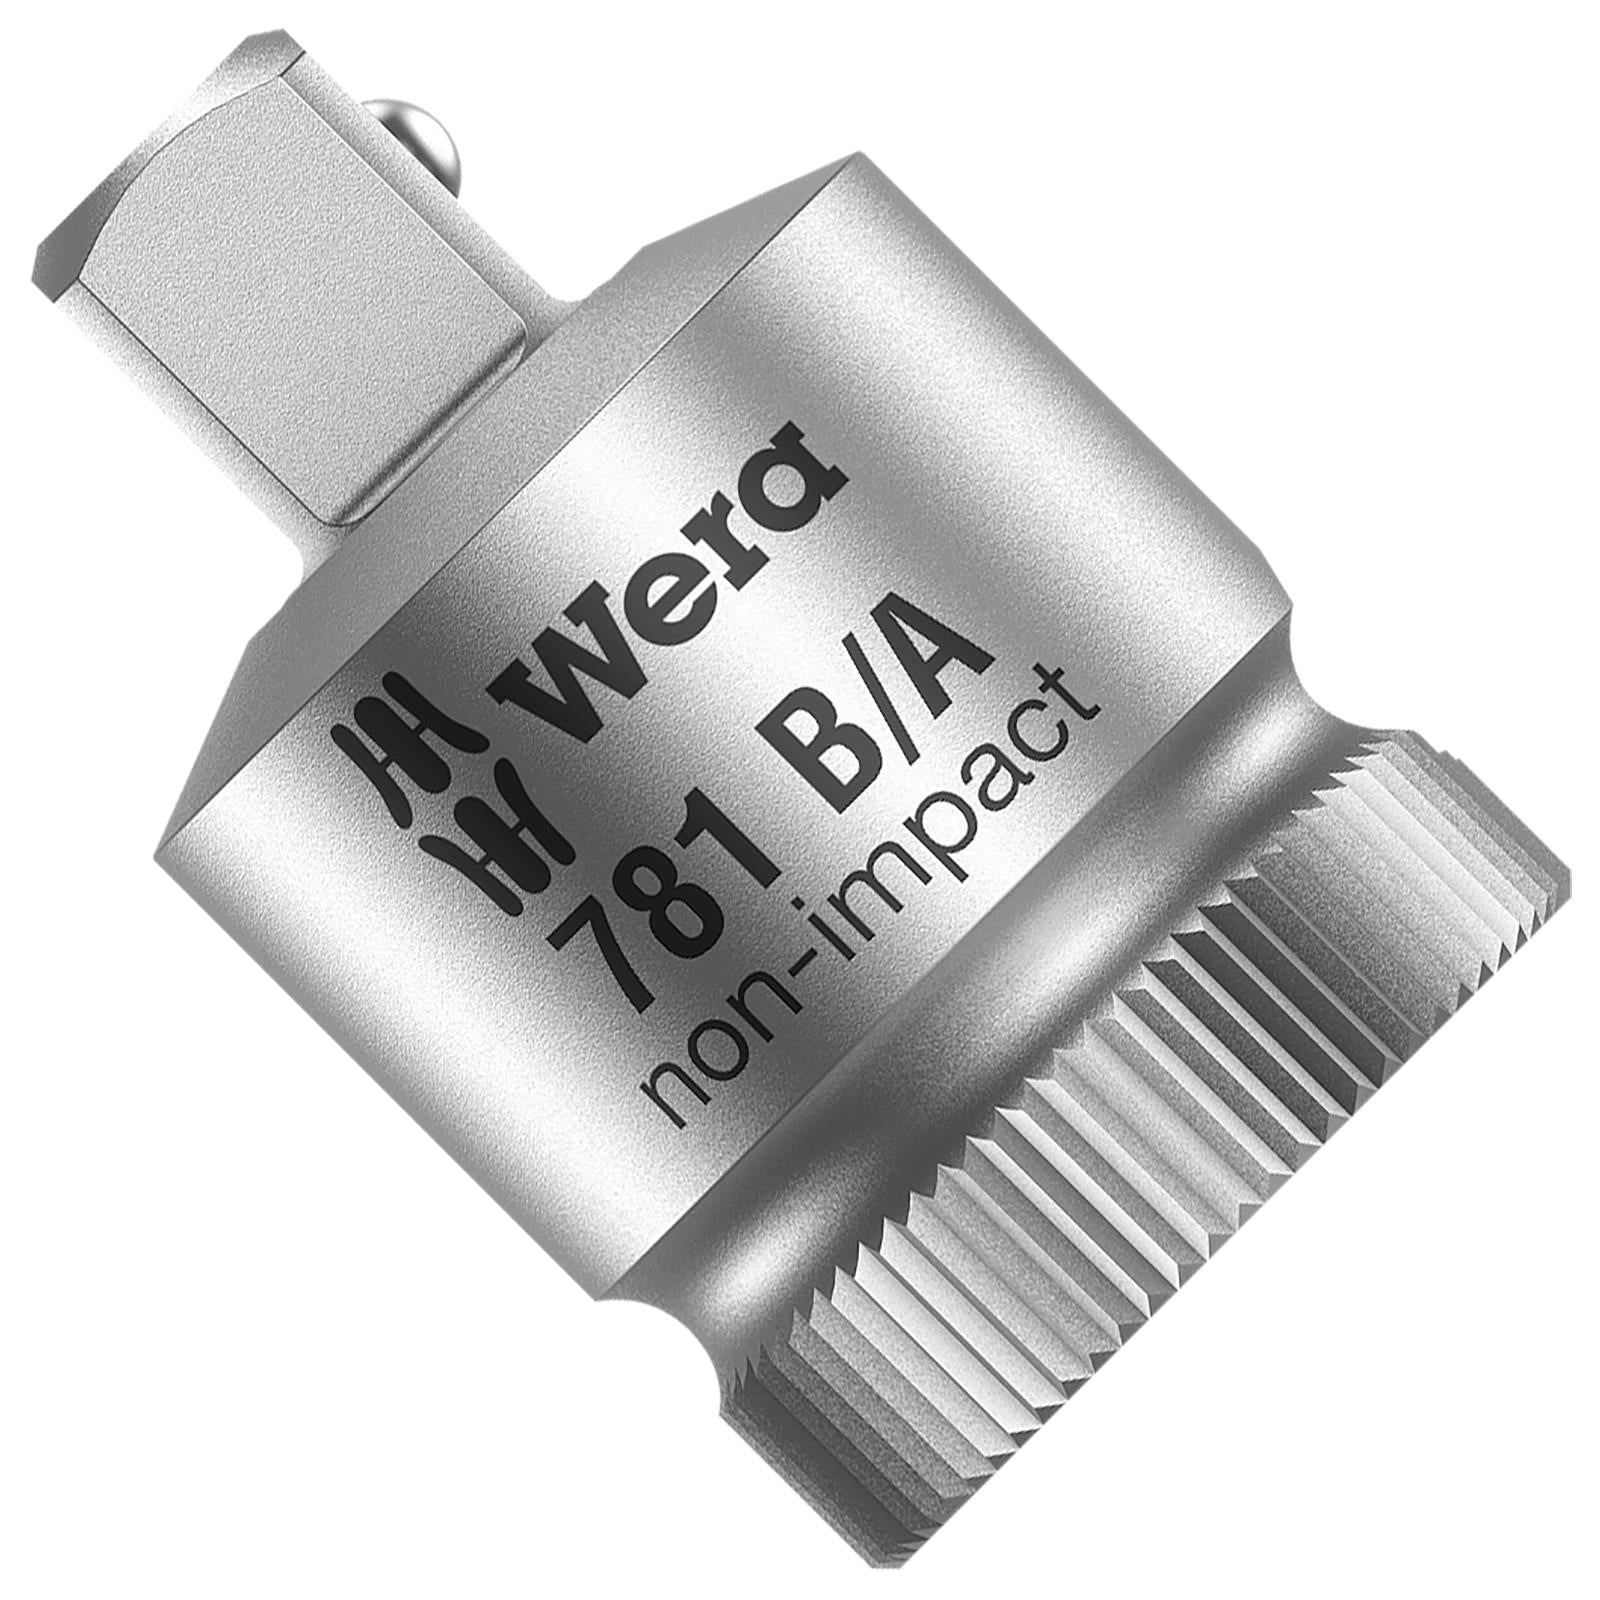 Wera Socket Adaptor Zyklop 3/8" to 1/4" Drive Connection 781 B/A 3/8" Drive